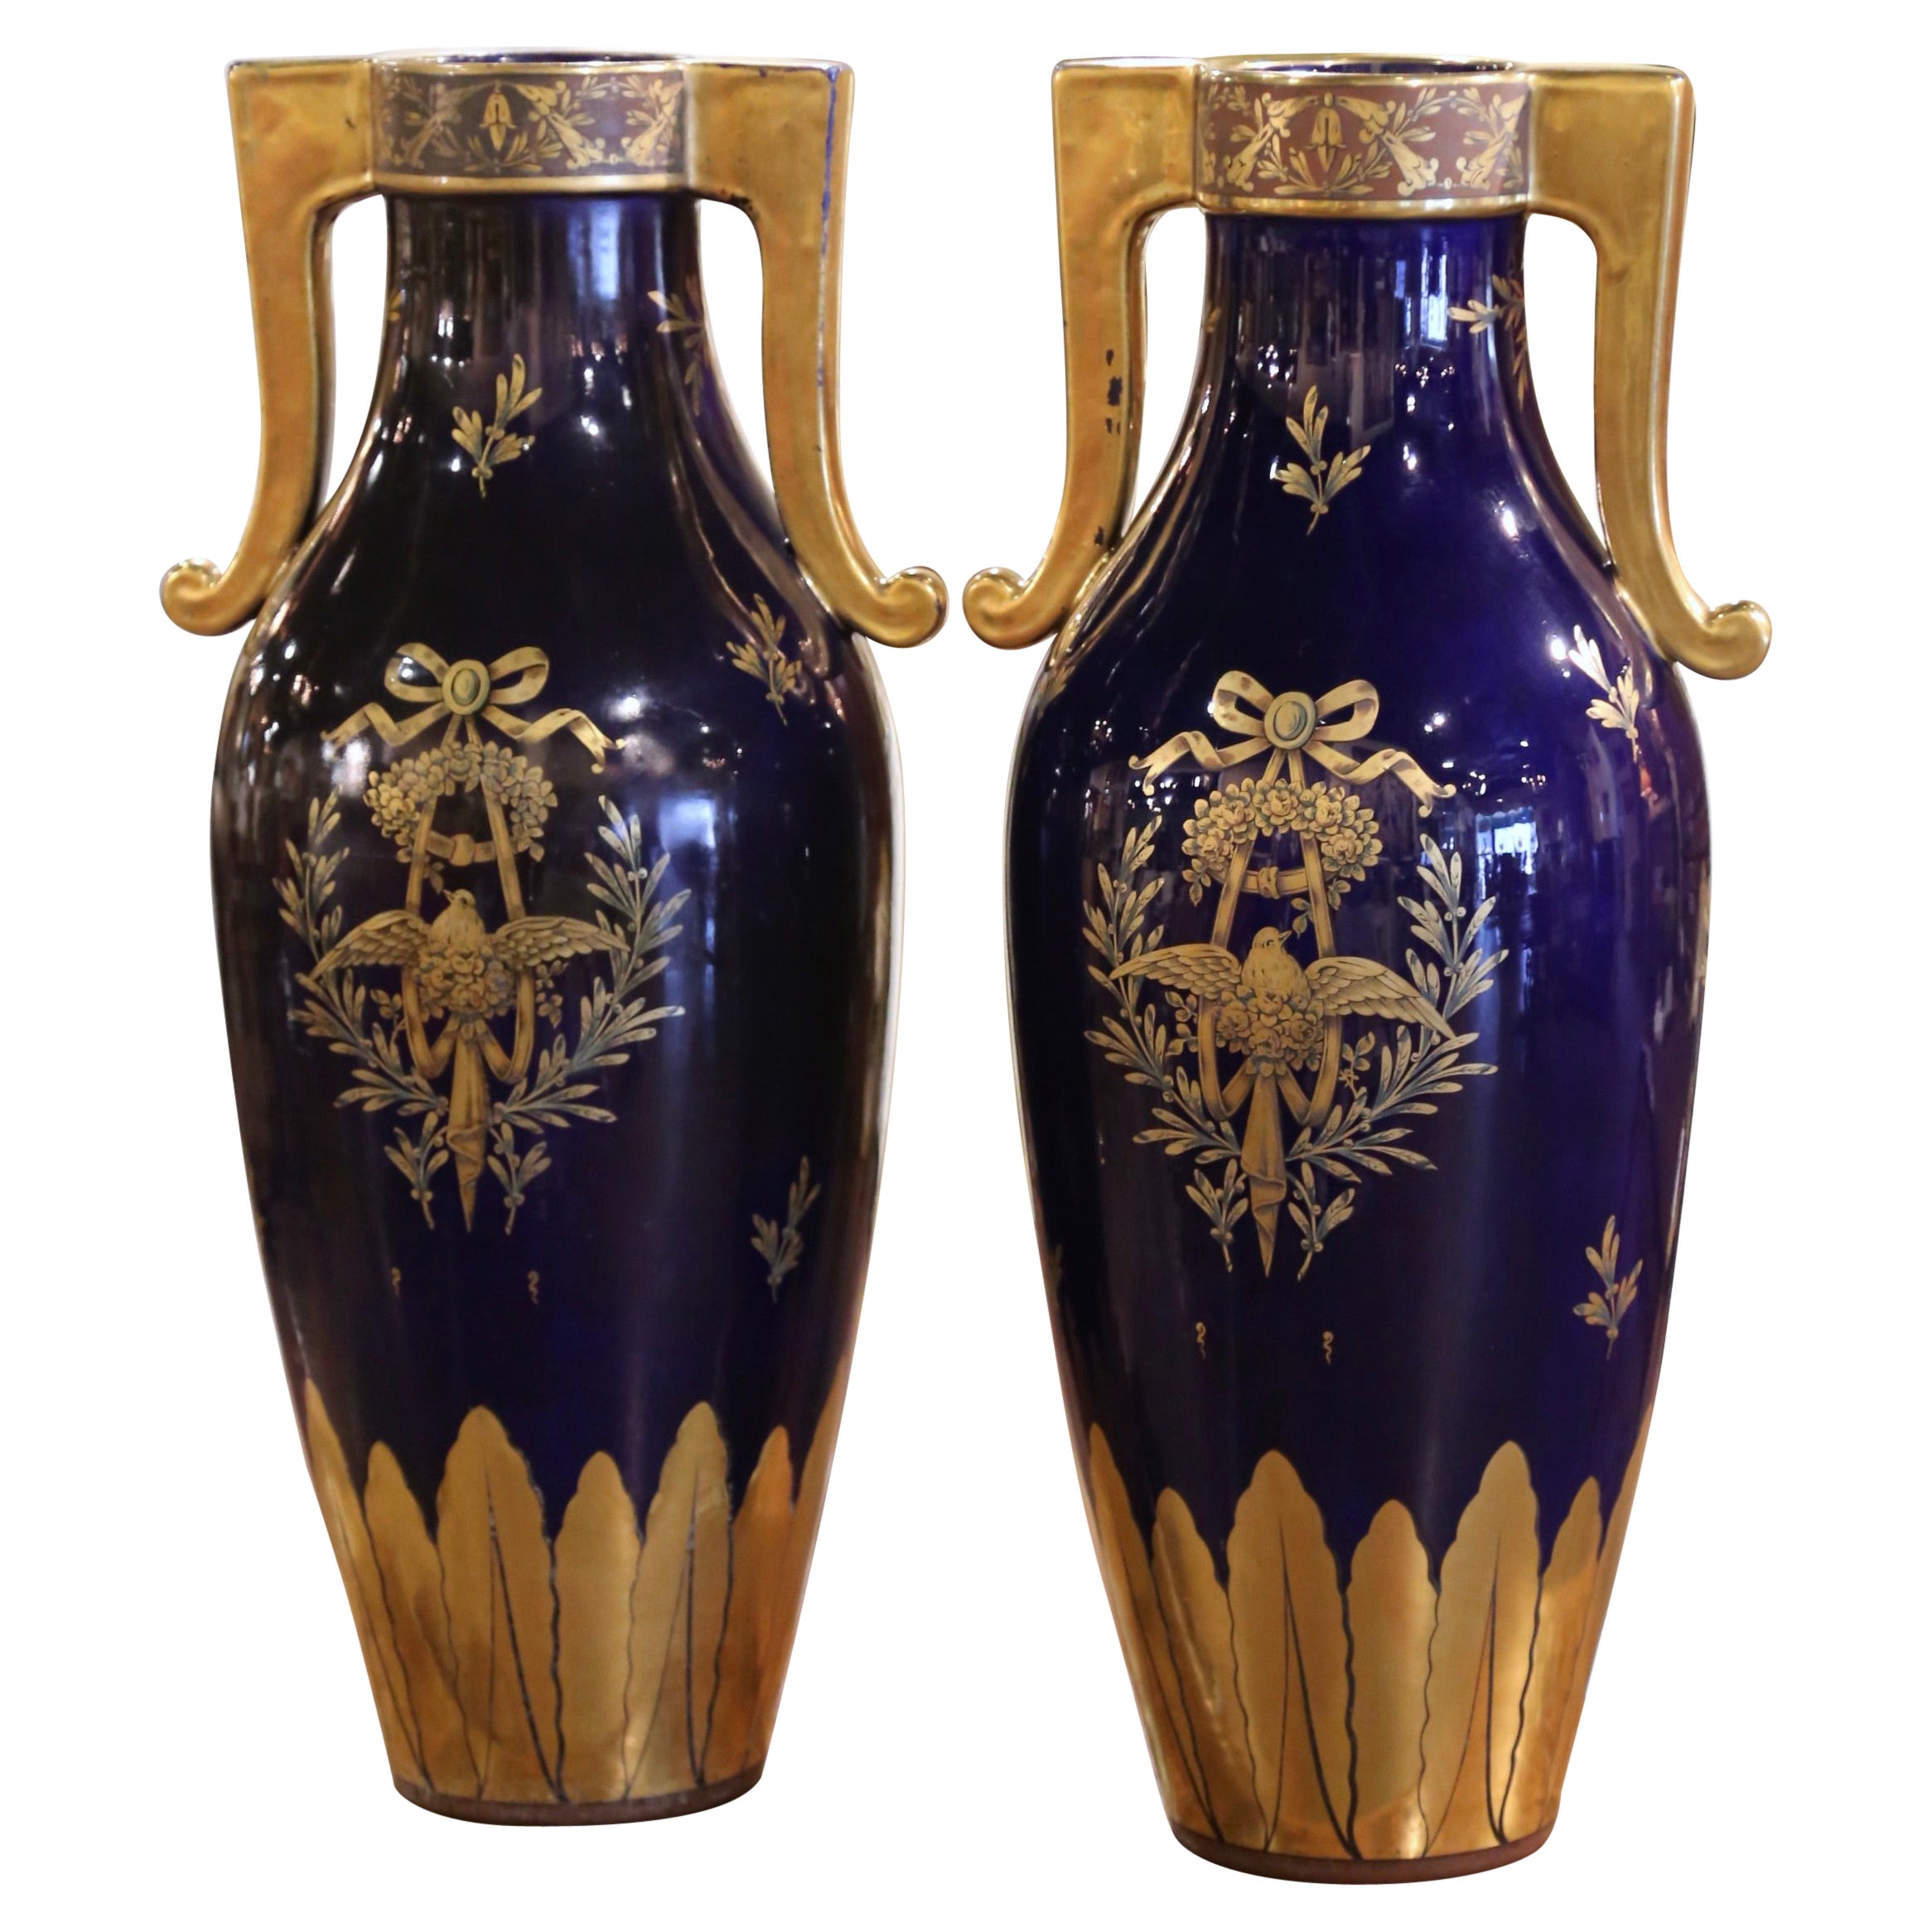 Pair of 19th Century French Neoclassical Painted and Gilt Porcelain Vases